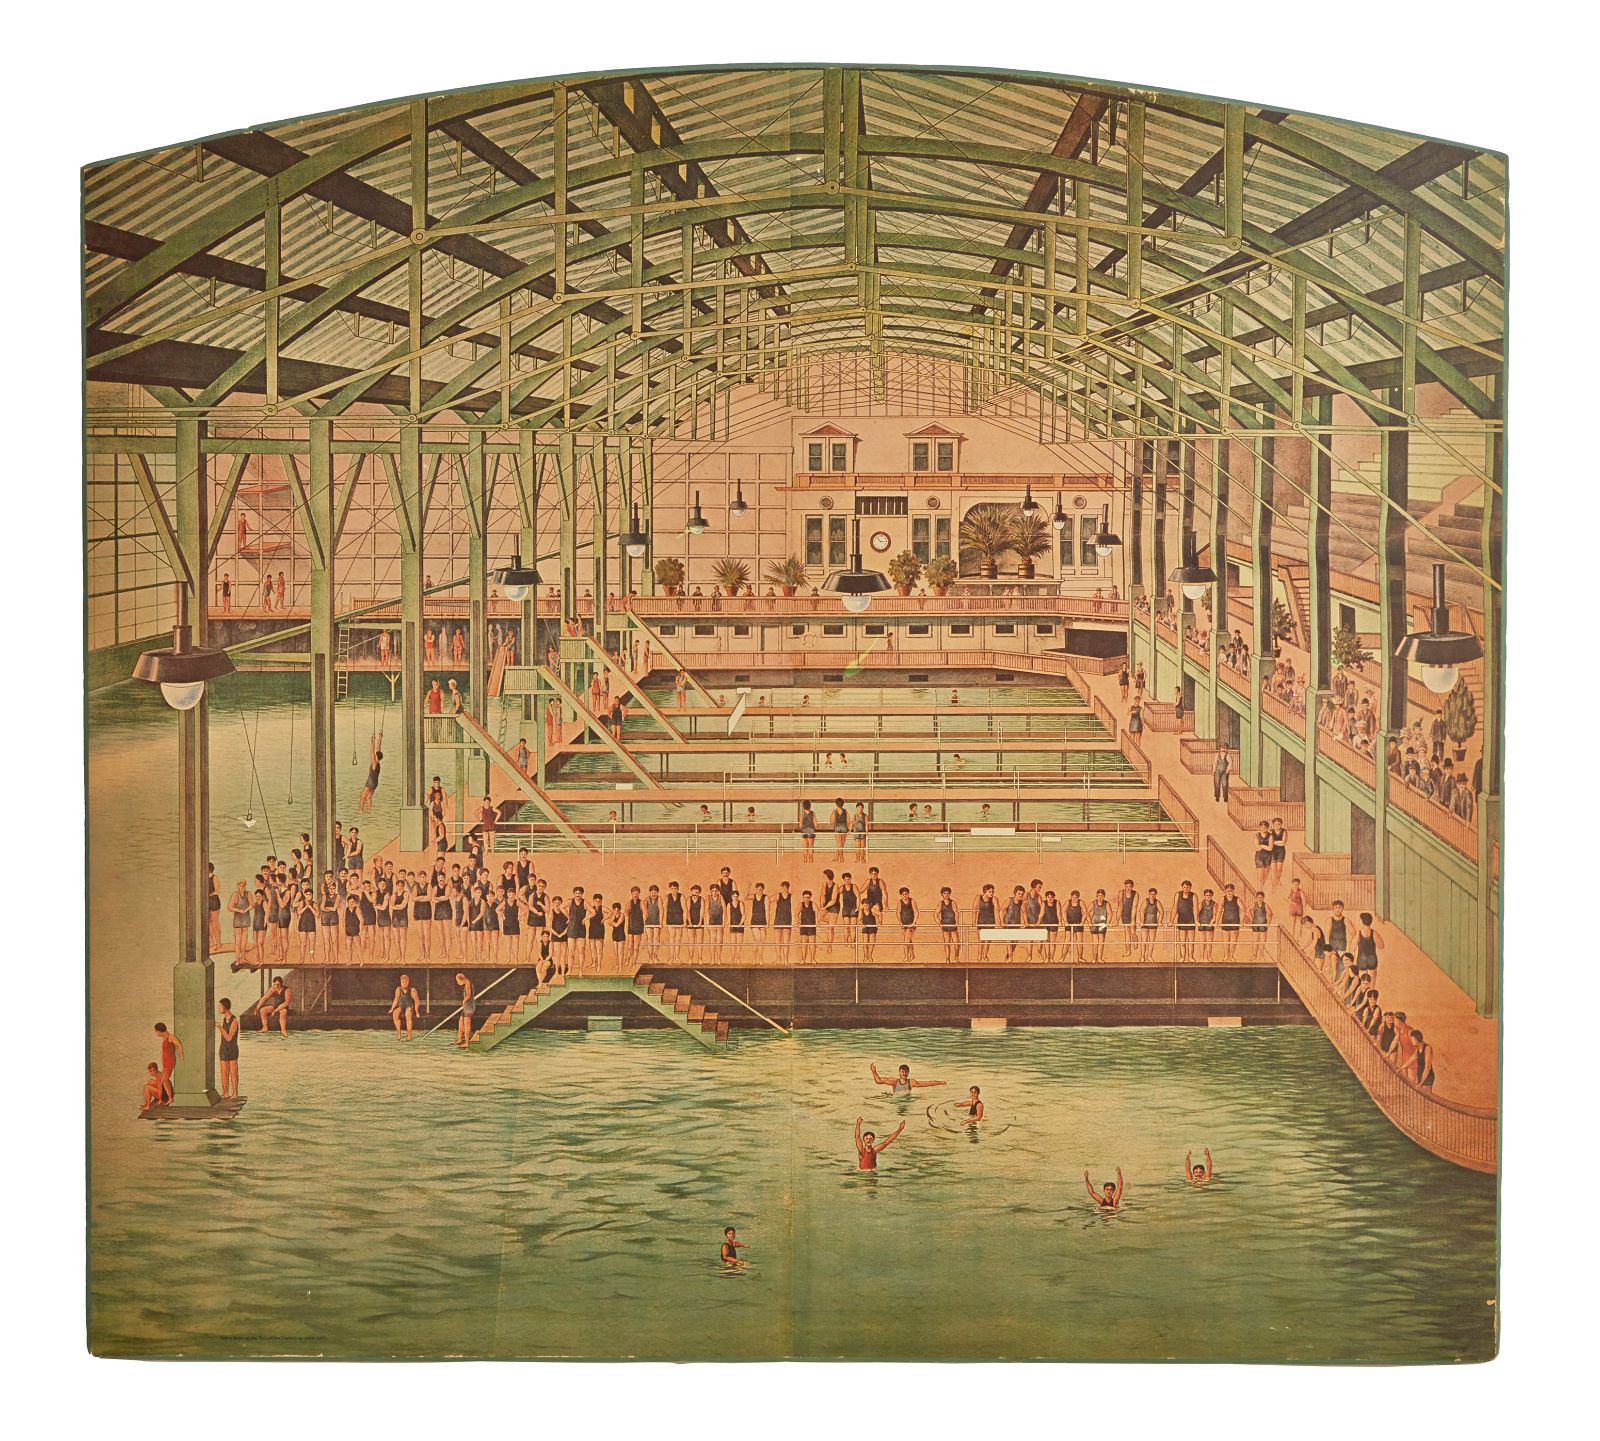 THE SUTRO BATHS REPRODUCTIONThe